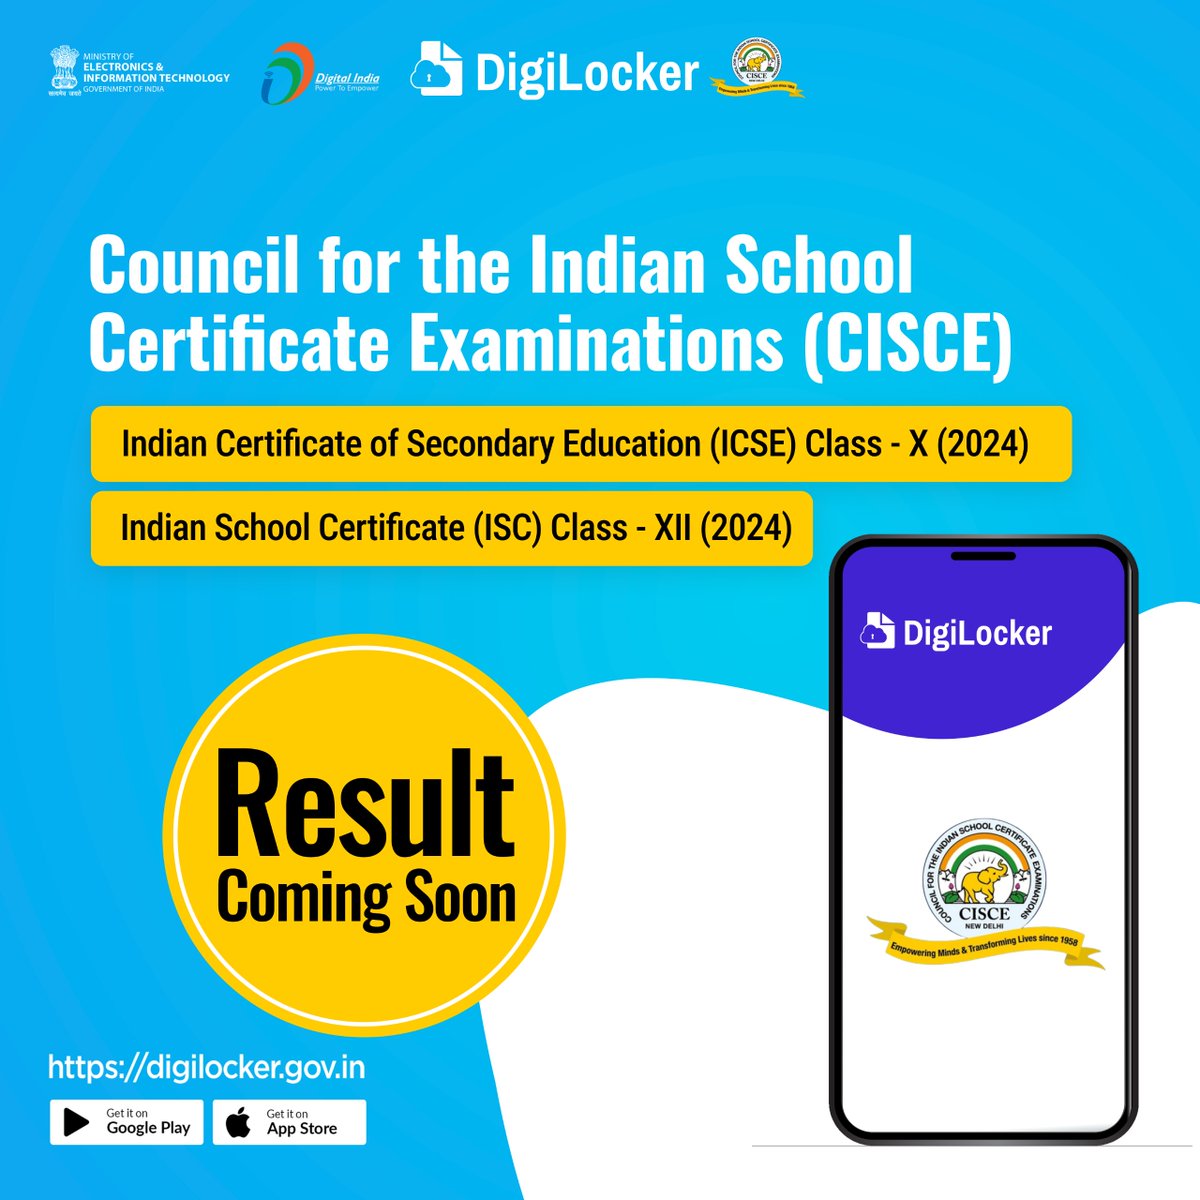 Council for the Indian School Certificate Examinations (CISCE), ICSE Class X and ISC Class XII 2024 results soon on #DigiLocker! Don't have an account yet? Create DigiLocker Account now digilocker.gov.in/installapp #CISCE #ICSE #ISC #resultscomingsoon